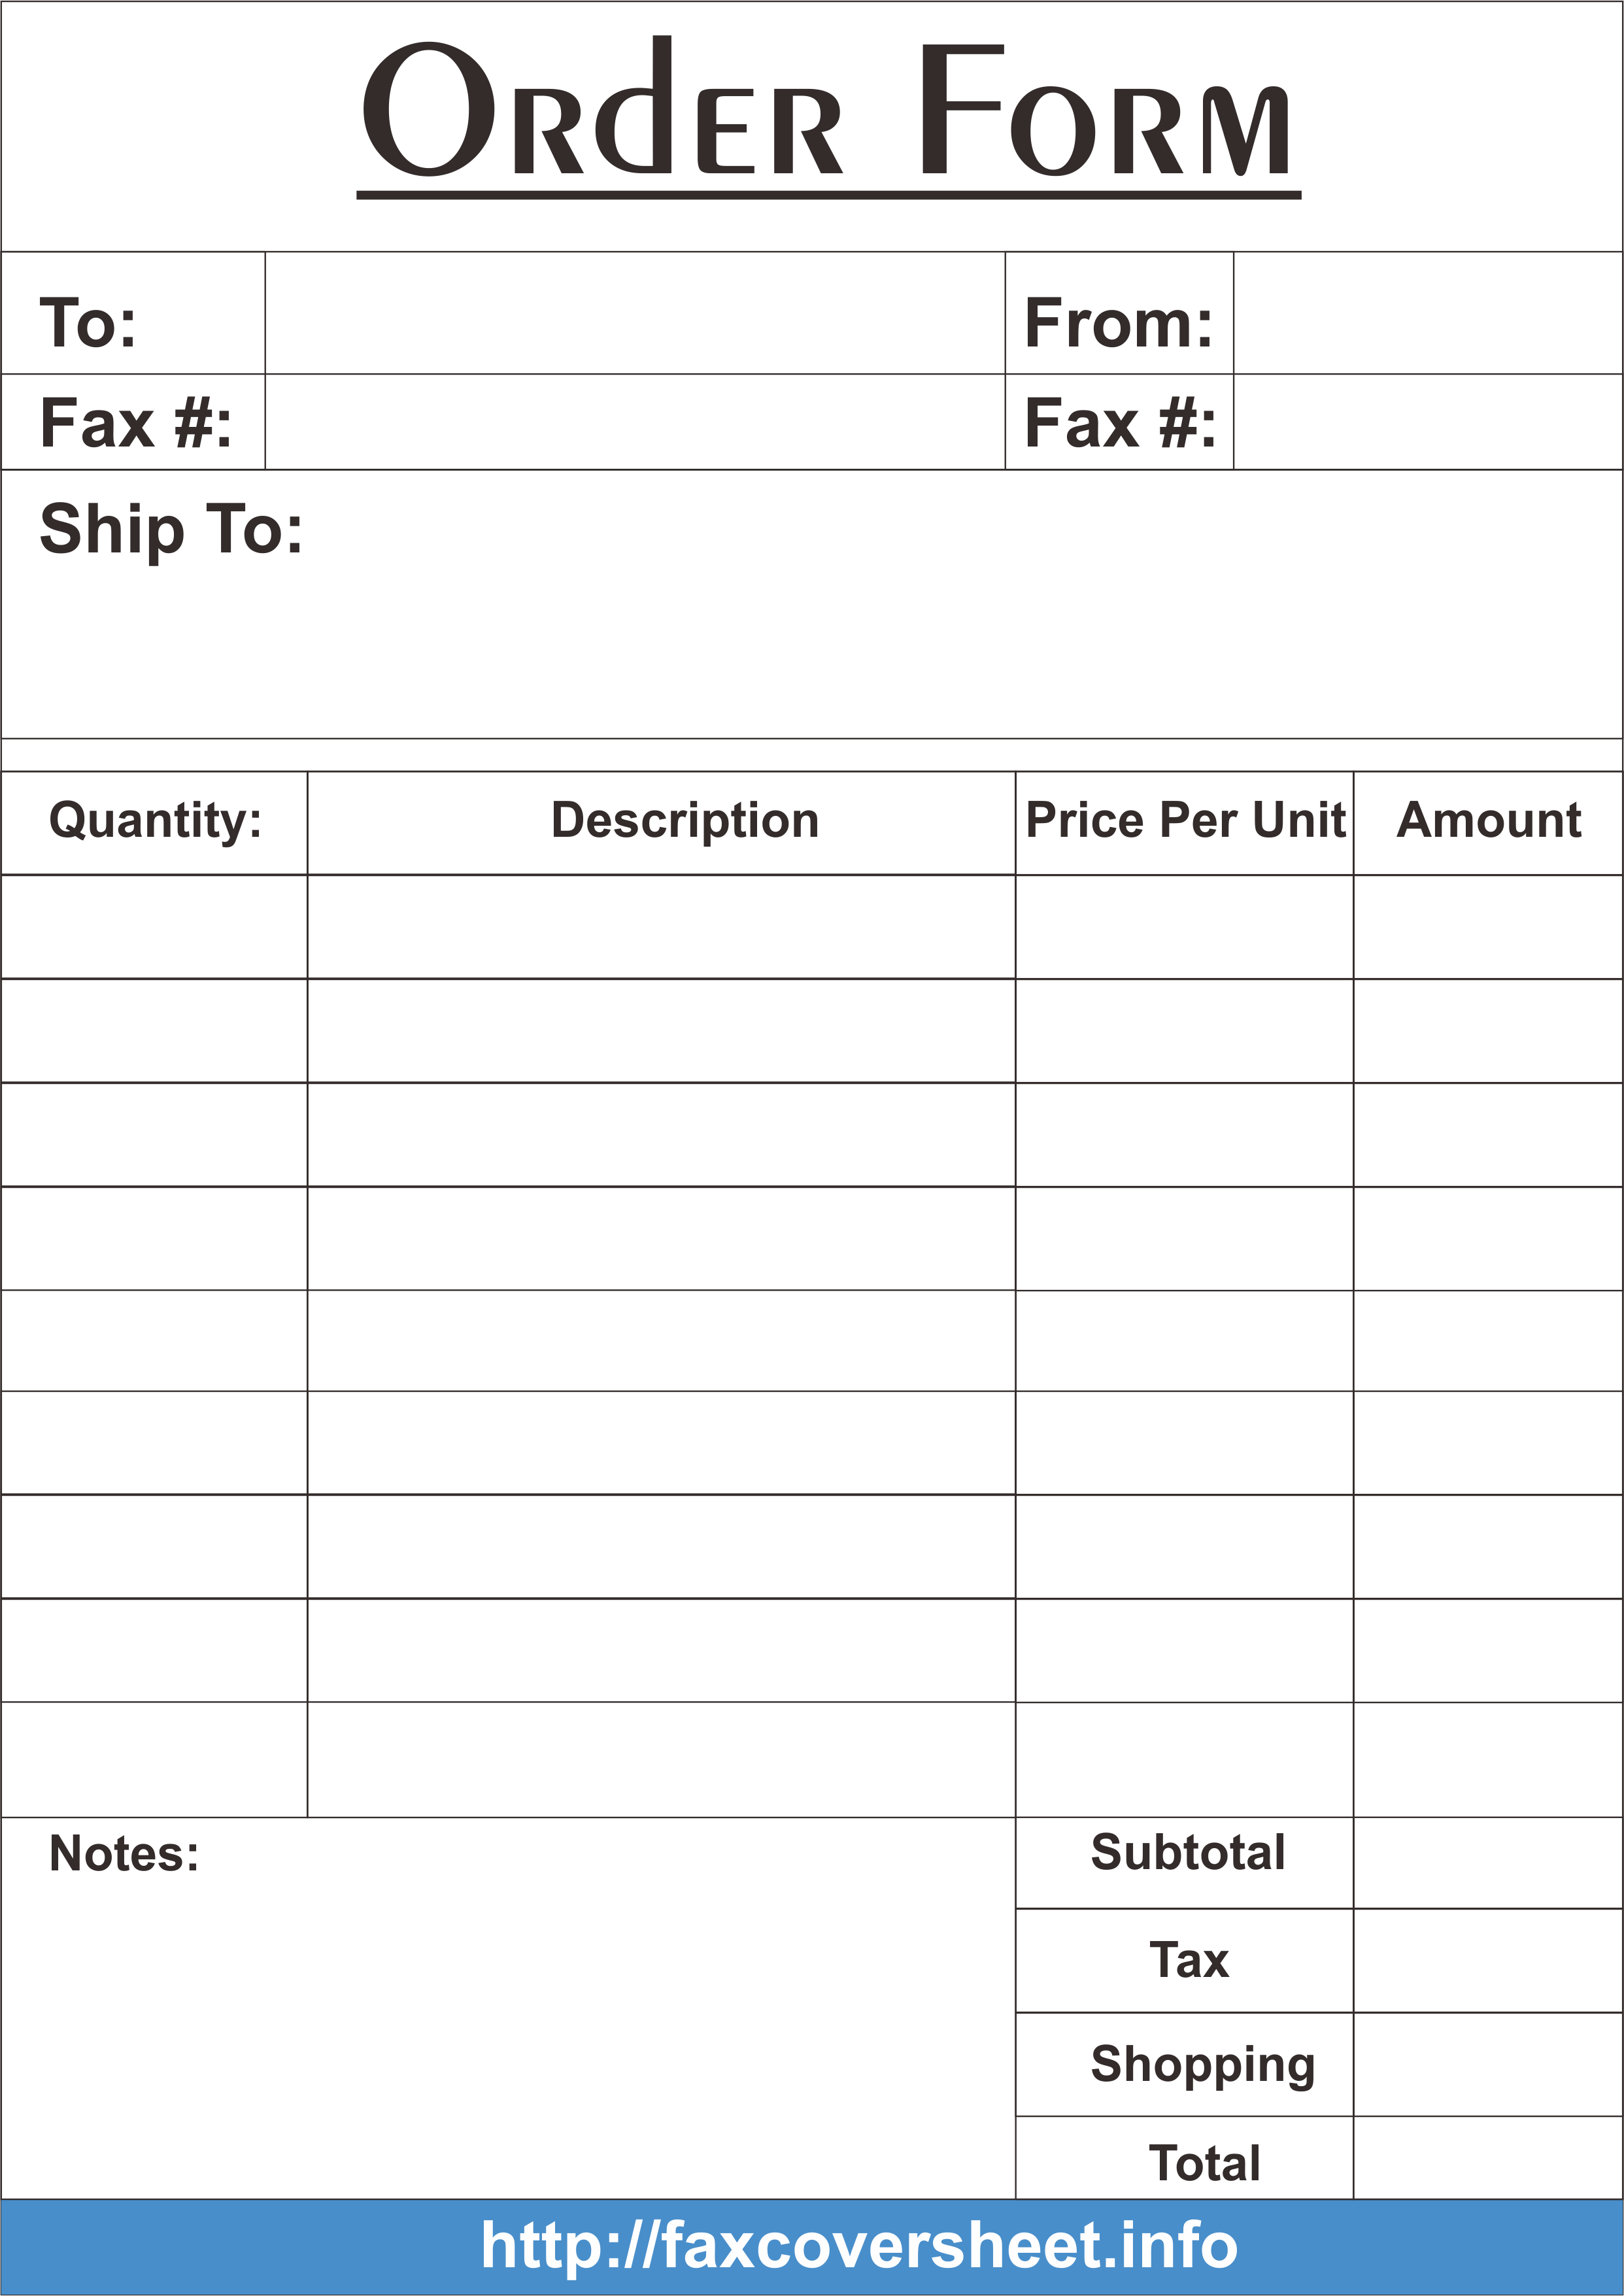 printable-order-form-template